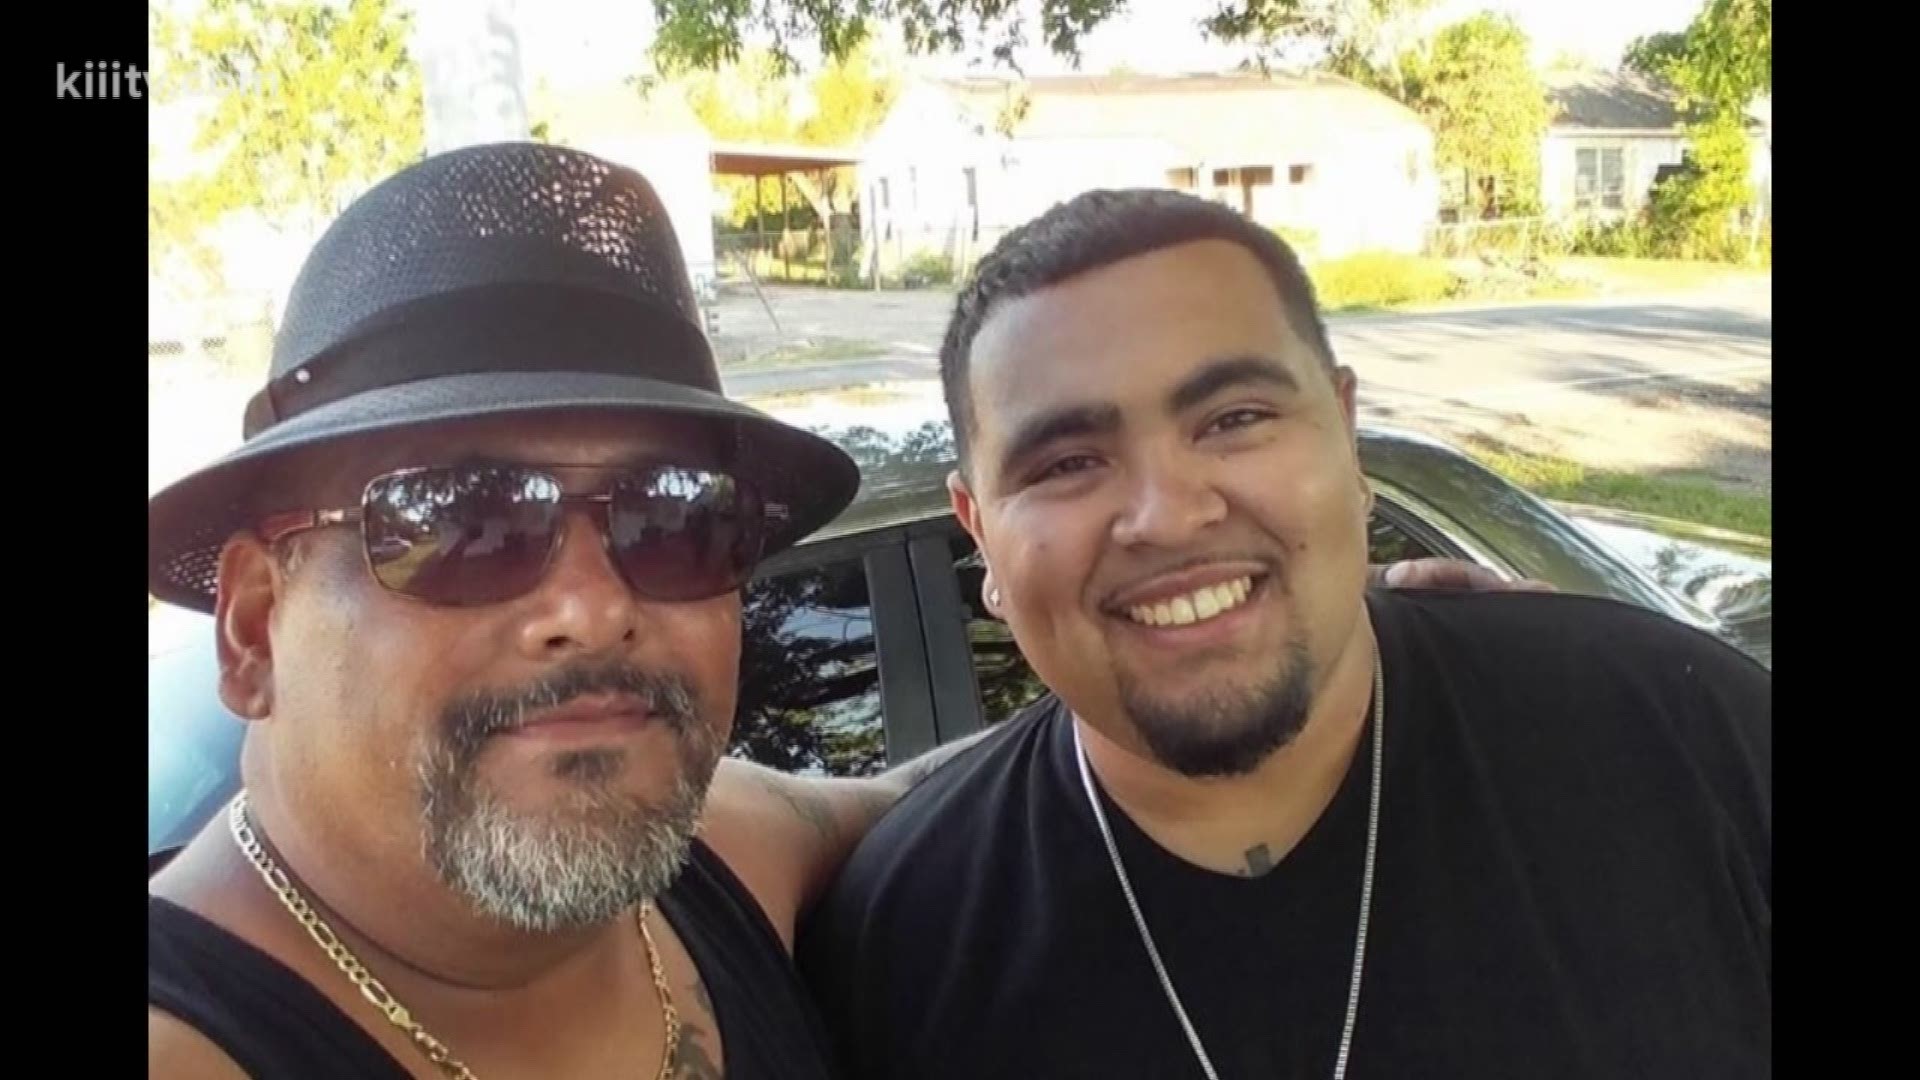 Family said 28-year-old Joe Trevino was the victim from a shooting on Sunday morning